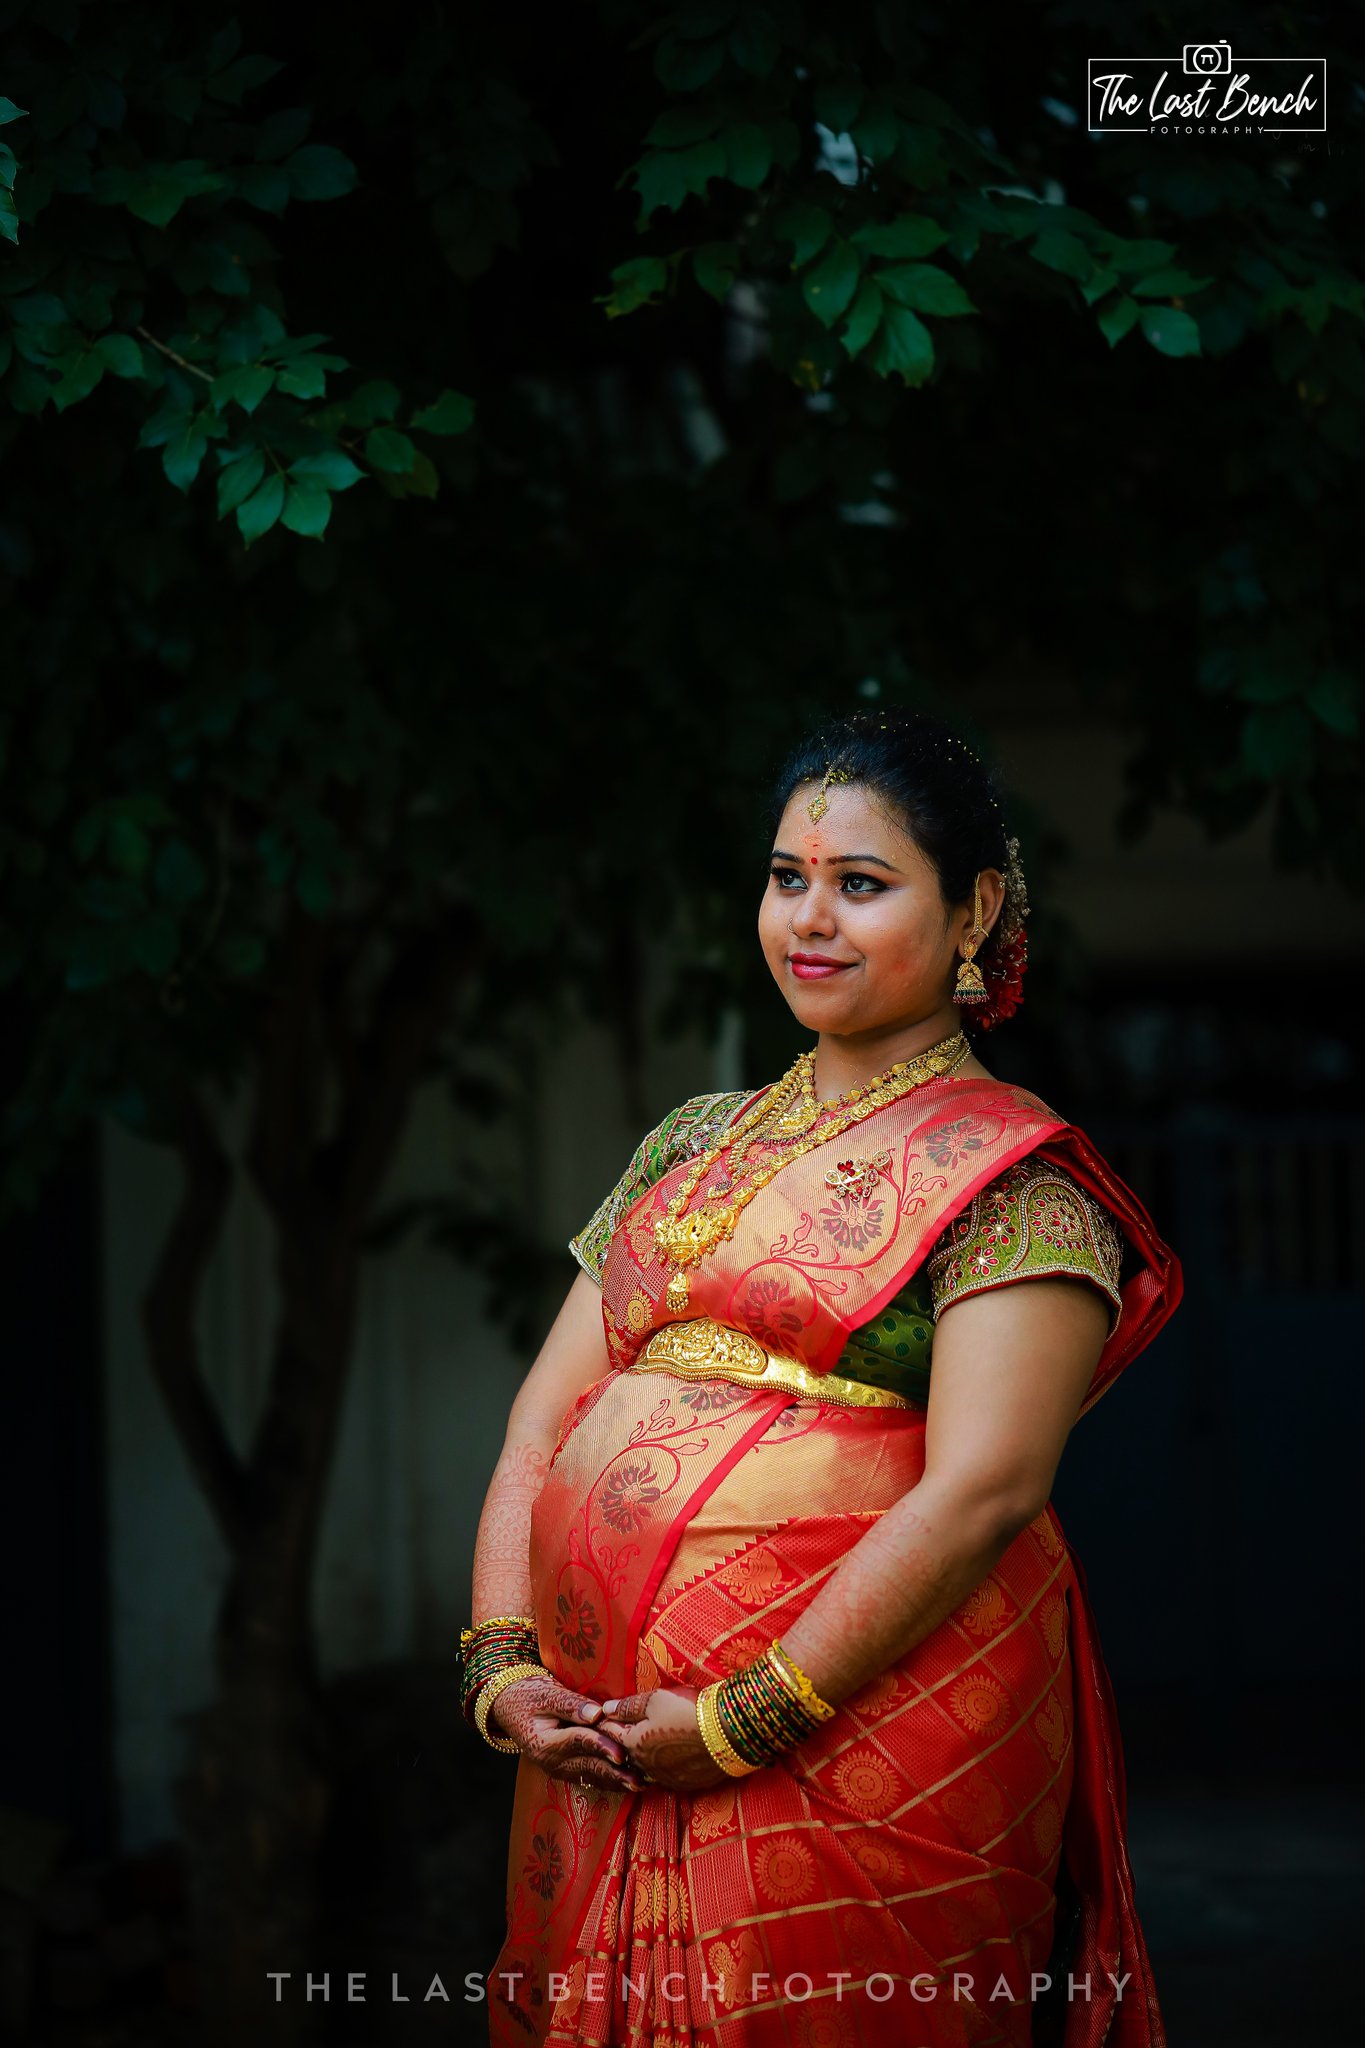 Wedding photography in Coimbatore - Irich photography